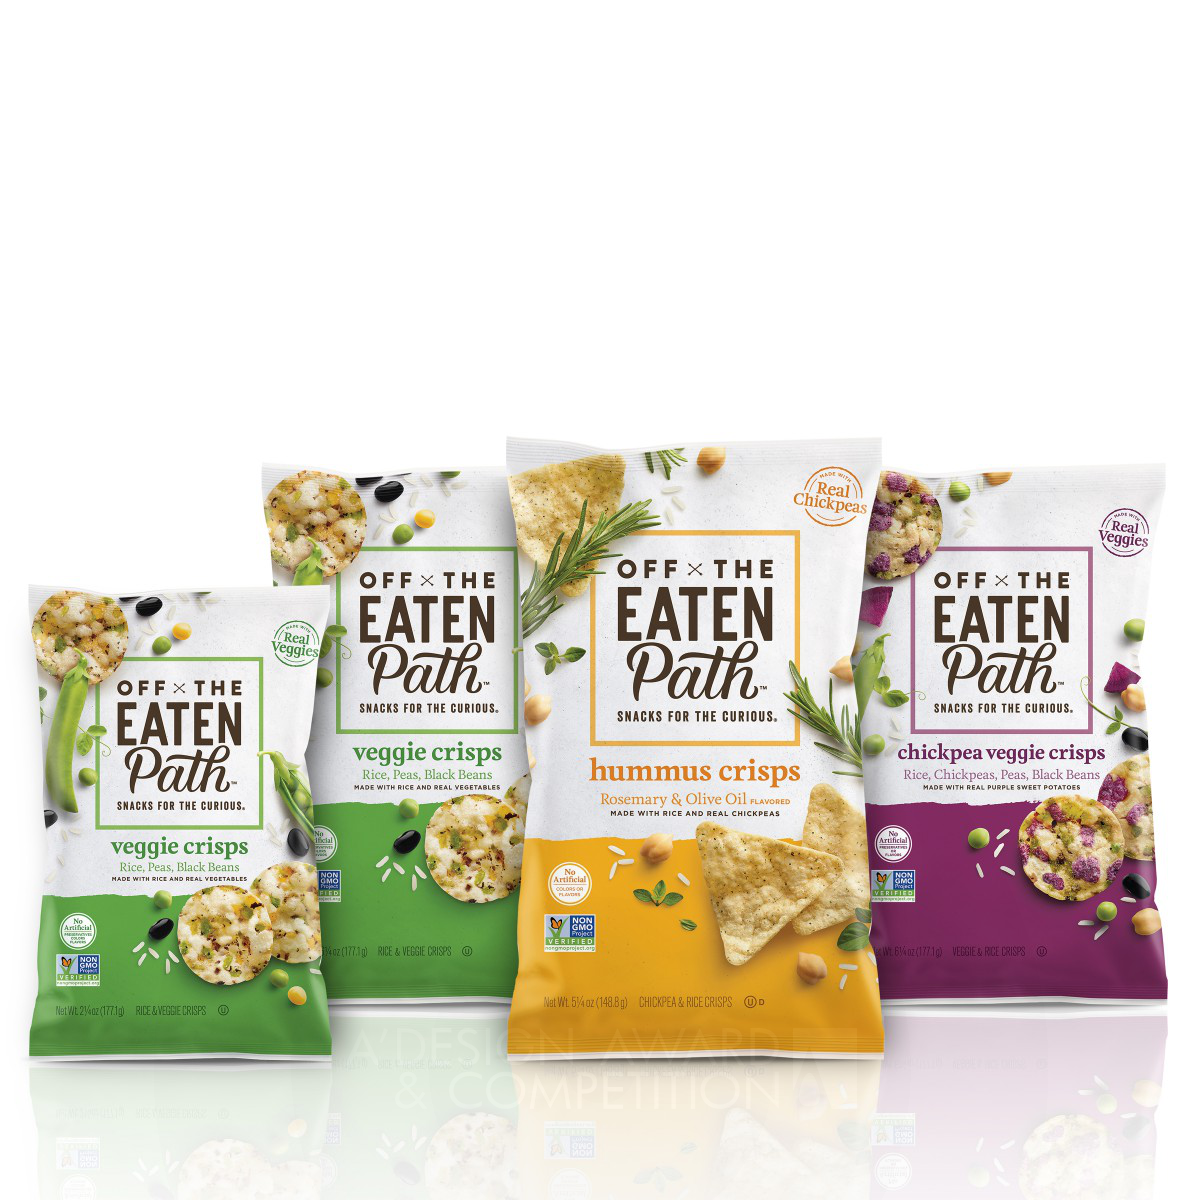 Off the Eaten Path Packaging by PepsiCo Design and Innovation Golden Packaging Design Award Winner 2020 